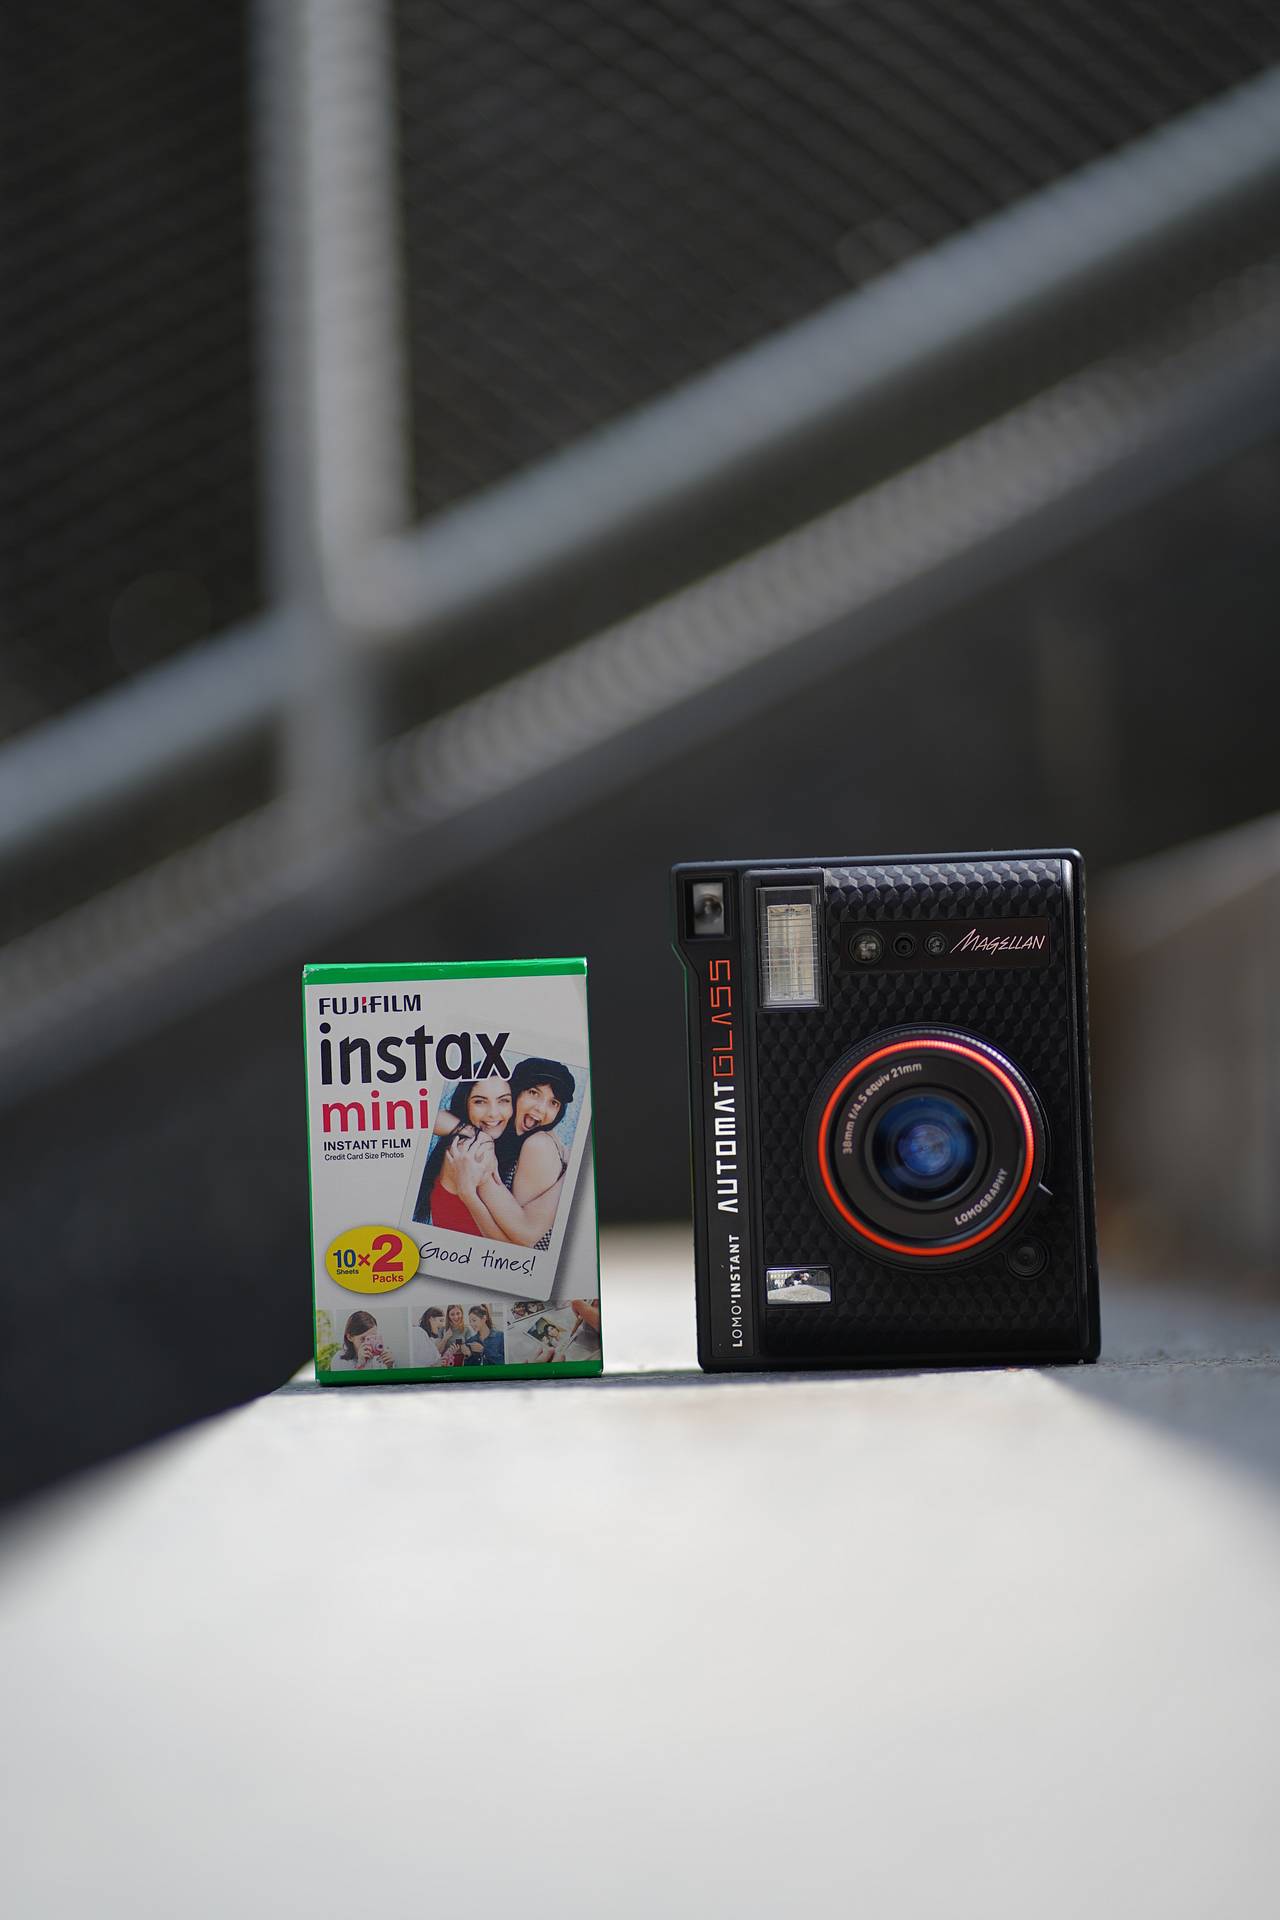 Uses Fujifilm Instax Mini film, the most affordable and widely available Instax film on the market.